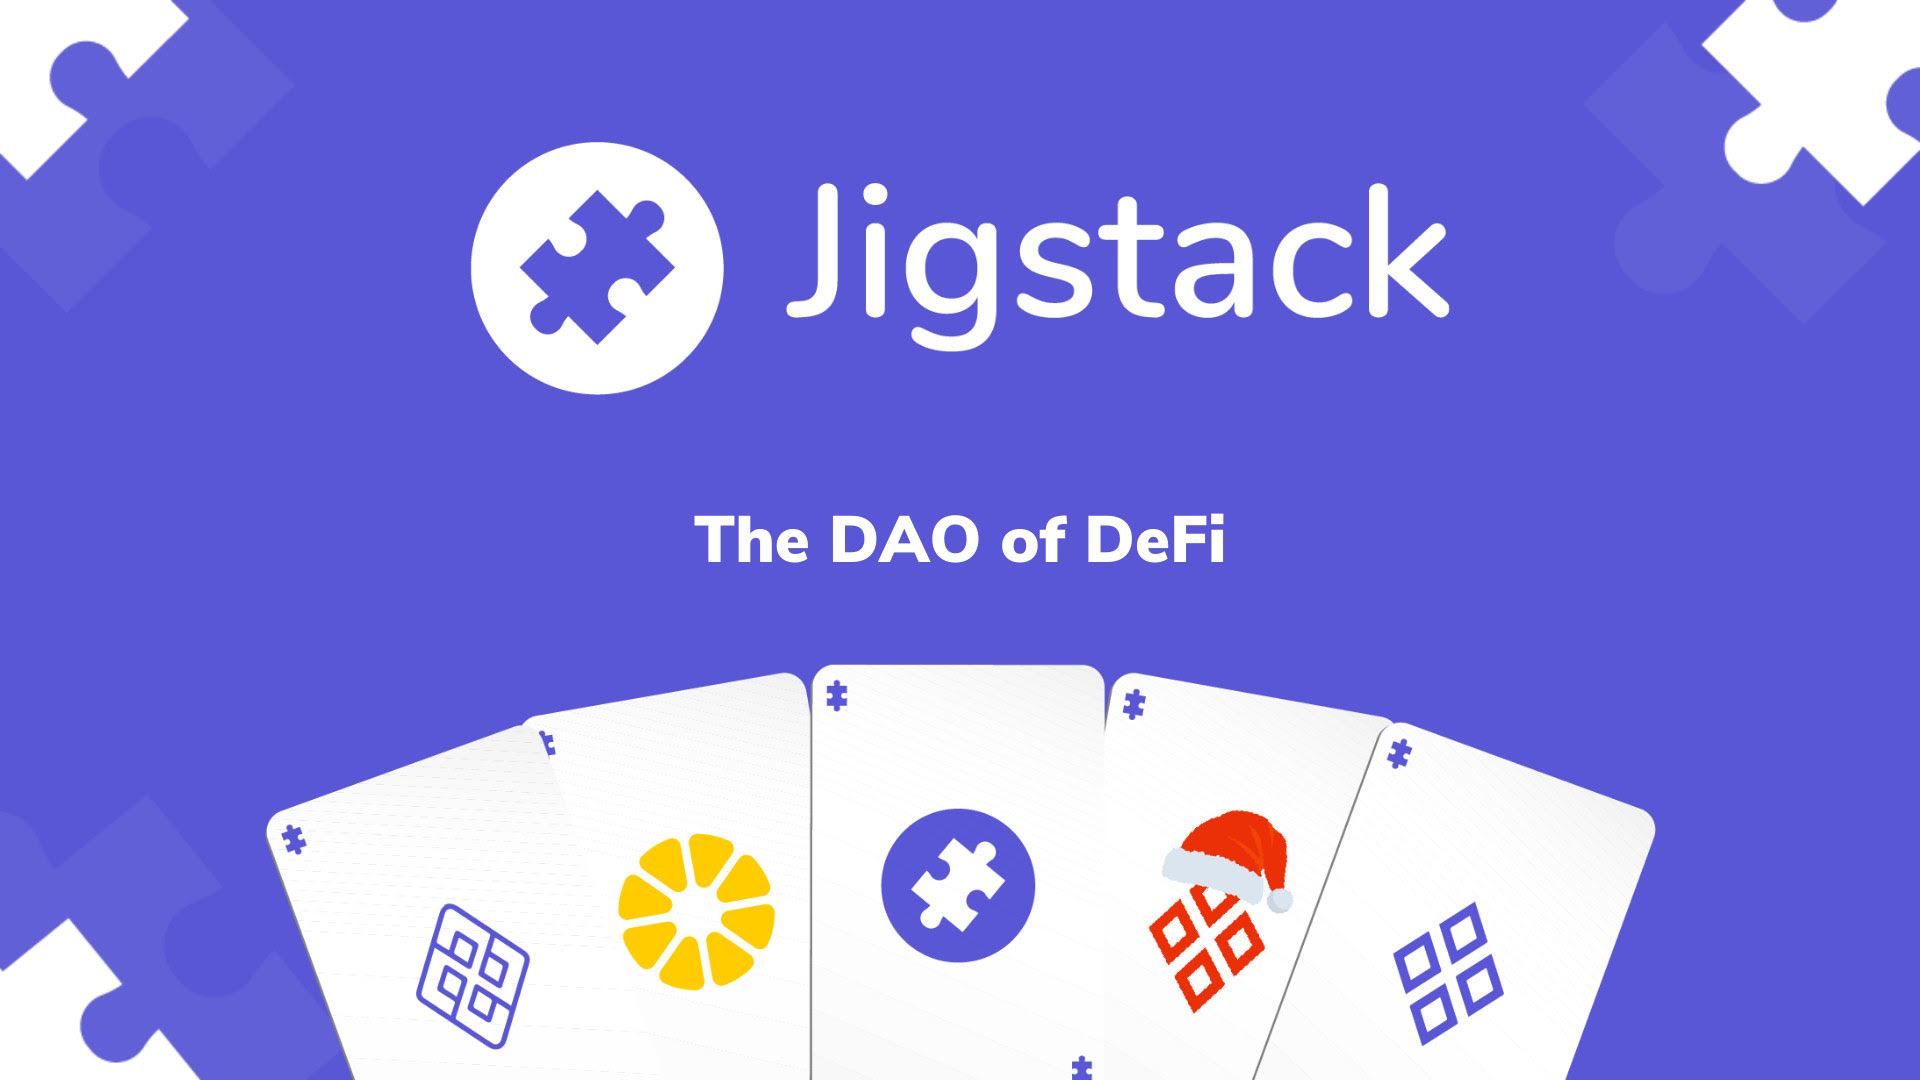 Jigstack Scores $3 Million in Funding for DeFi Projects